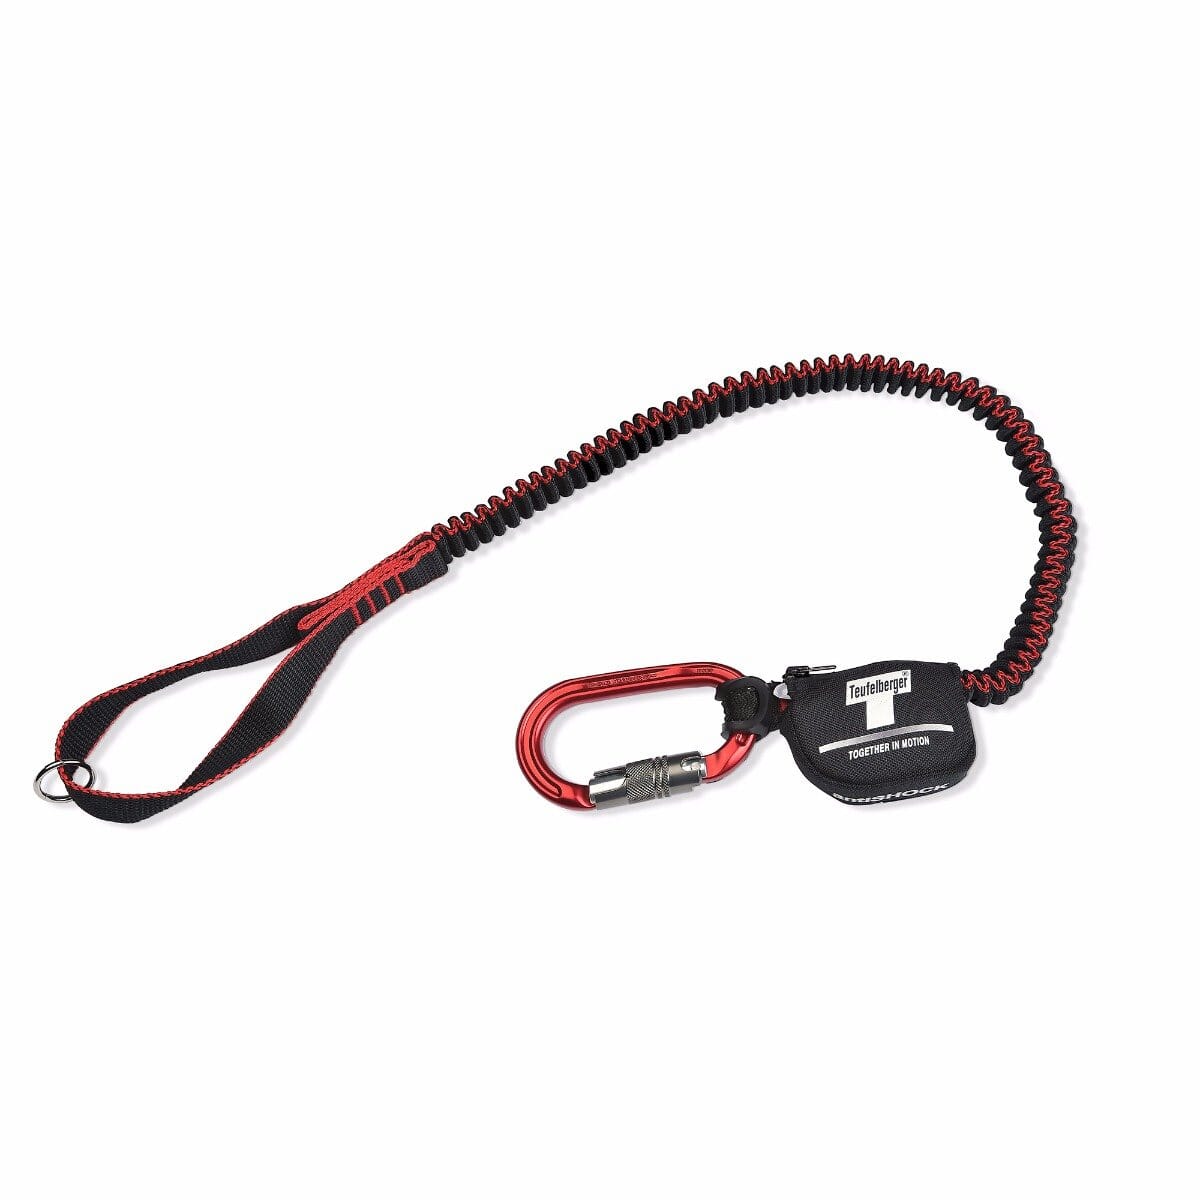 Teufelberger Tool Tether Anti Shock Chainsaw Lanyard - 7350844 Chainsaws Teufelberger 